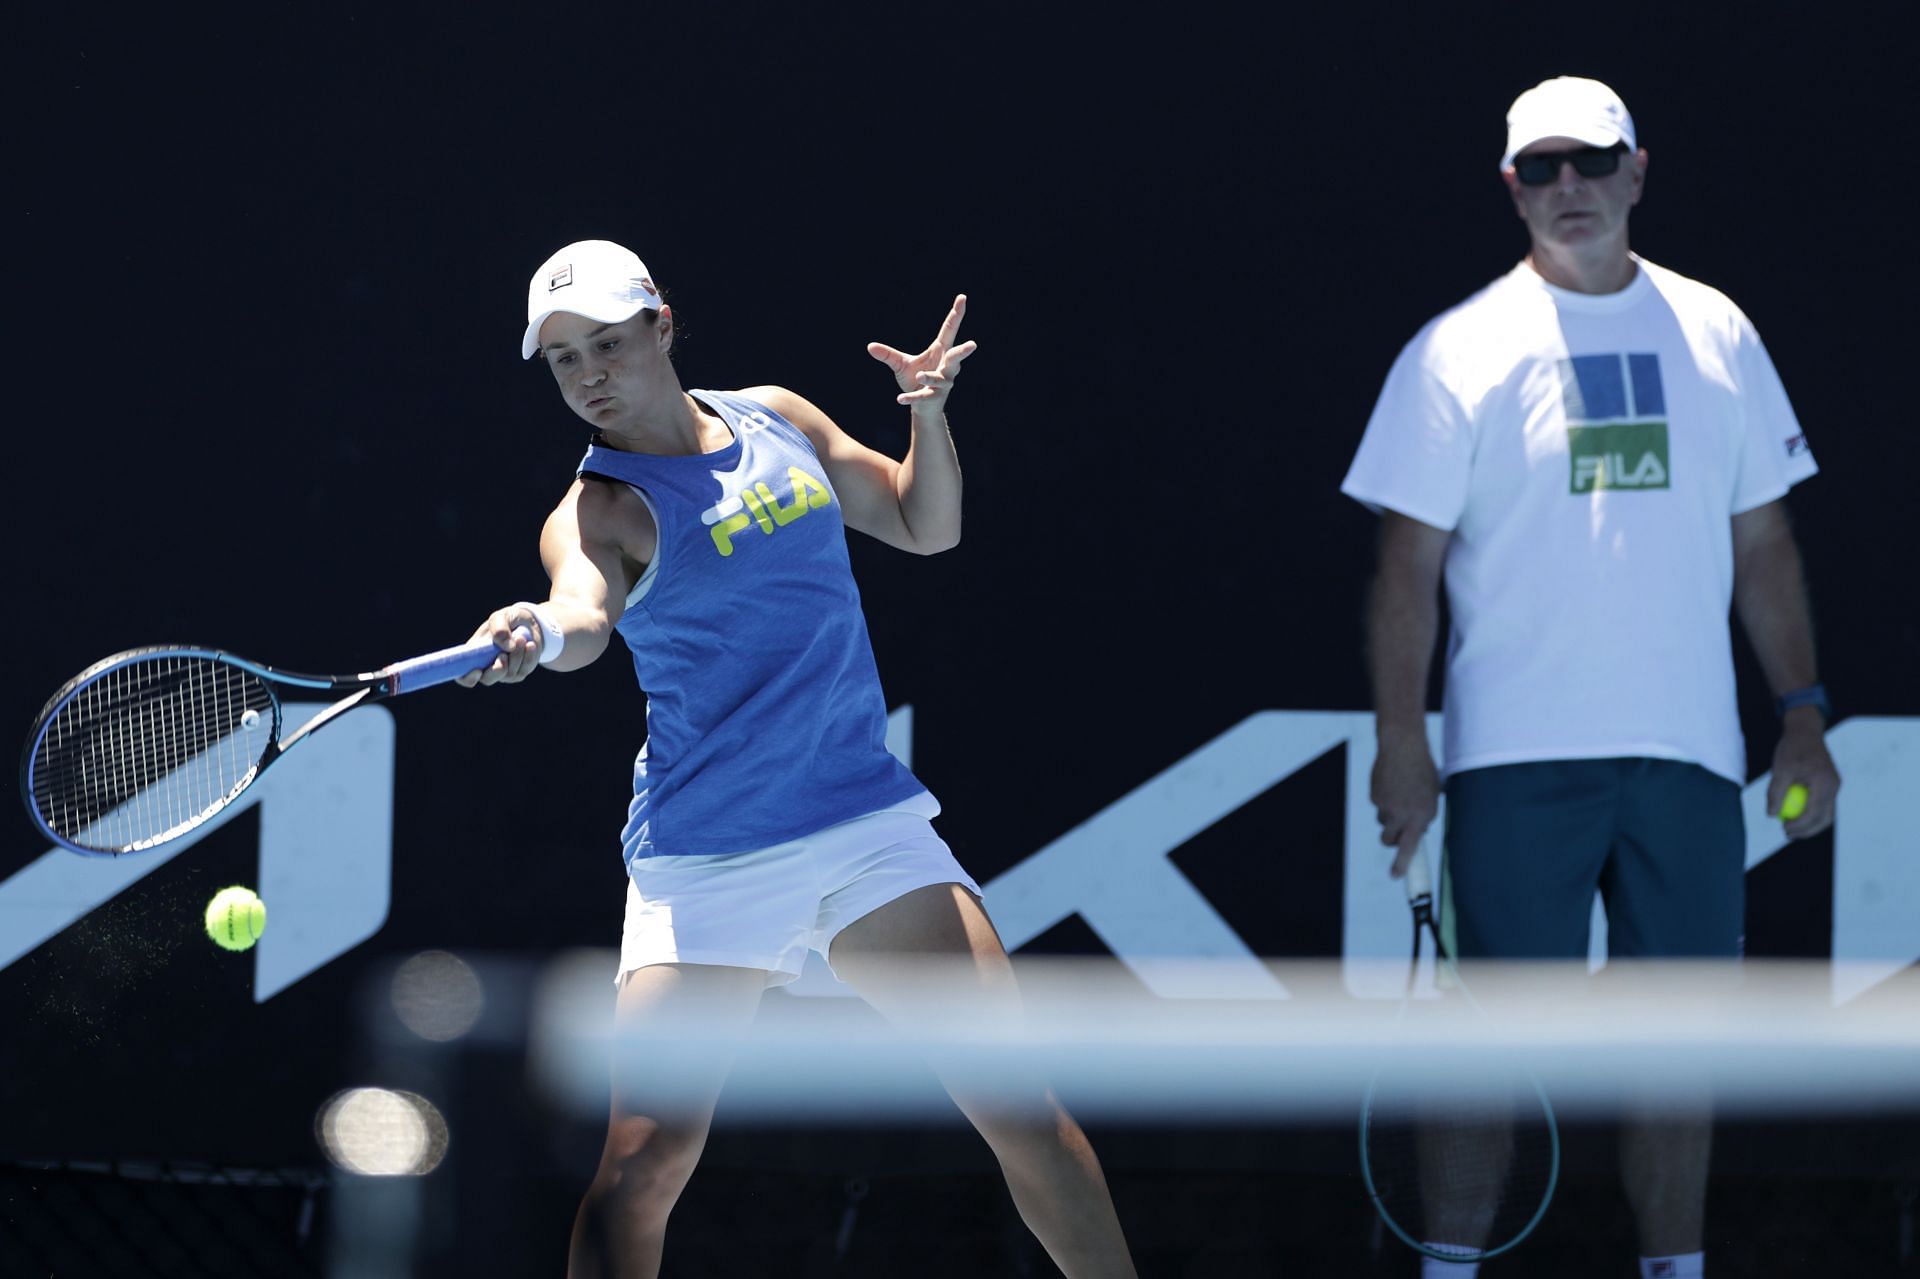 Ashleigh Barty will be keen on winning the Australia Open this year